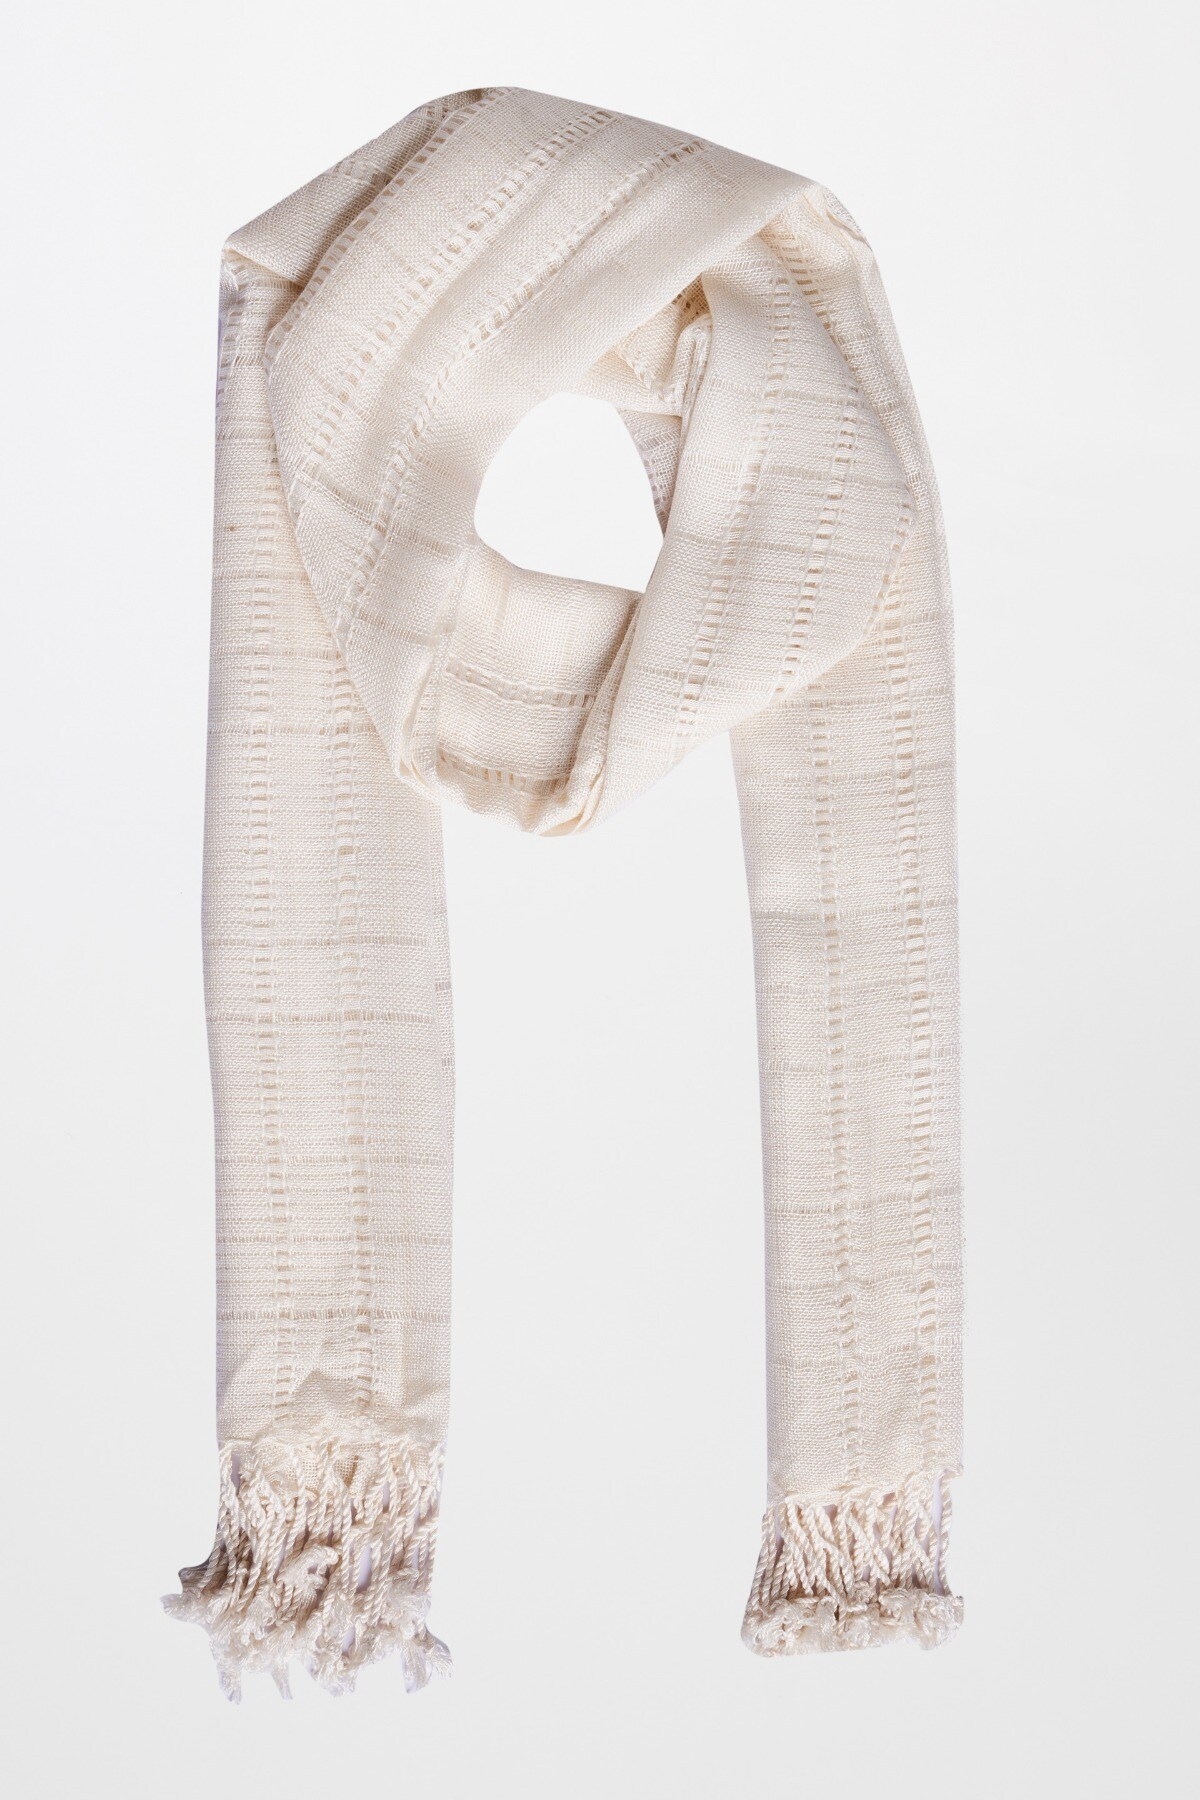 AND | Off White Viscose Scarf